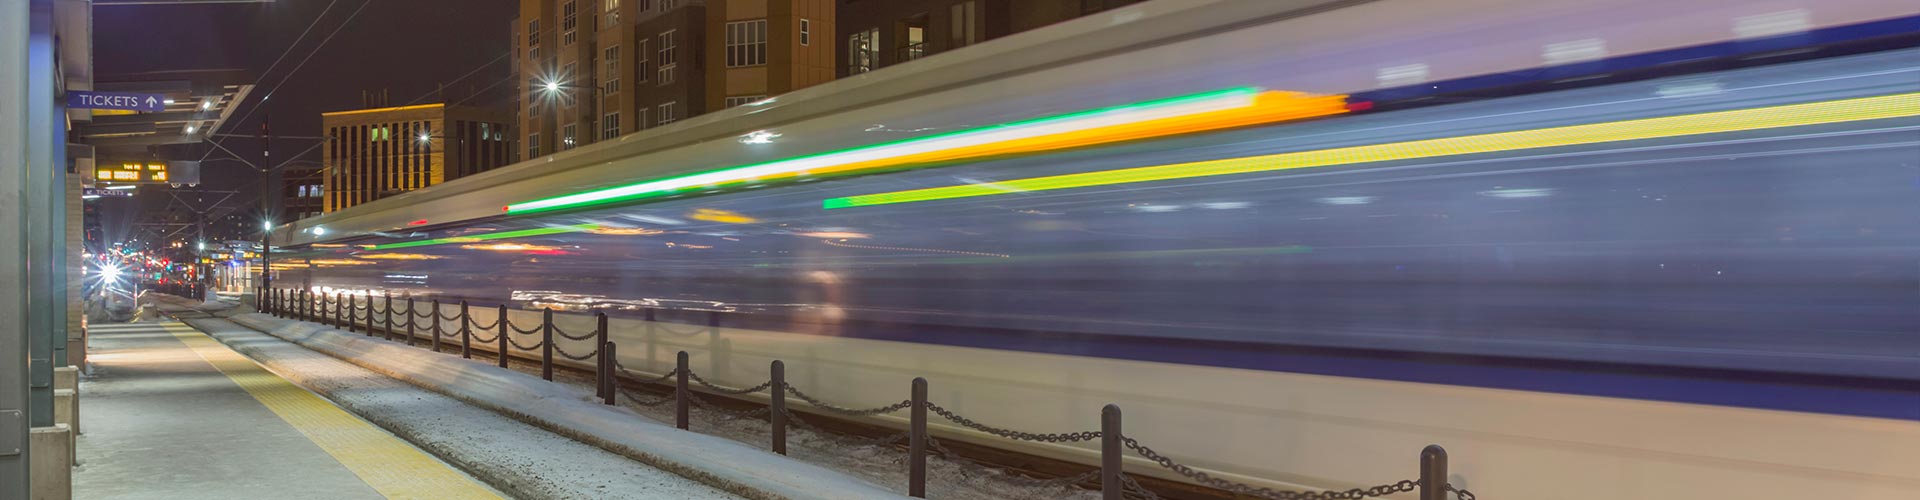 Moving Lightrail